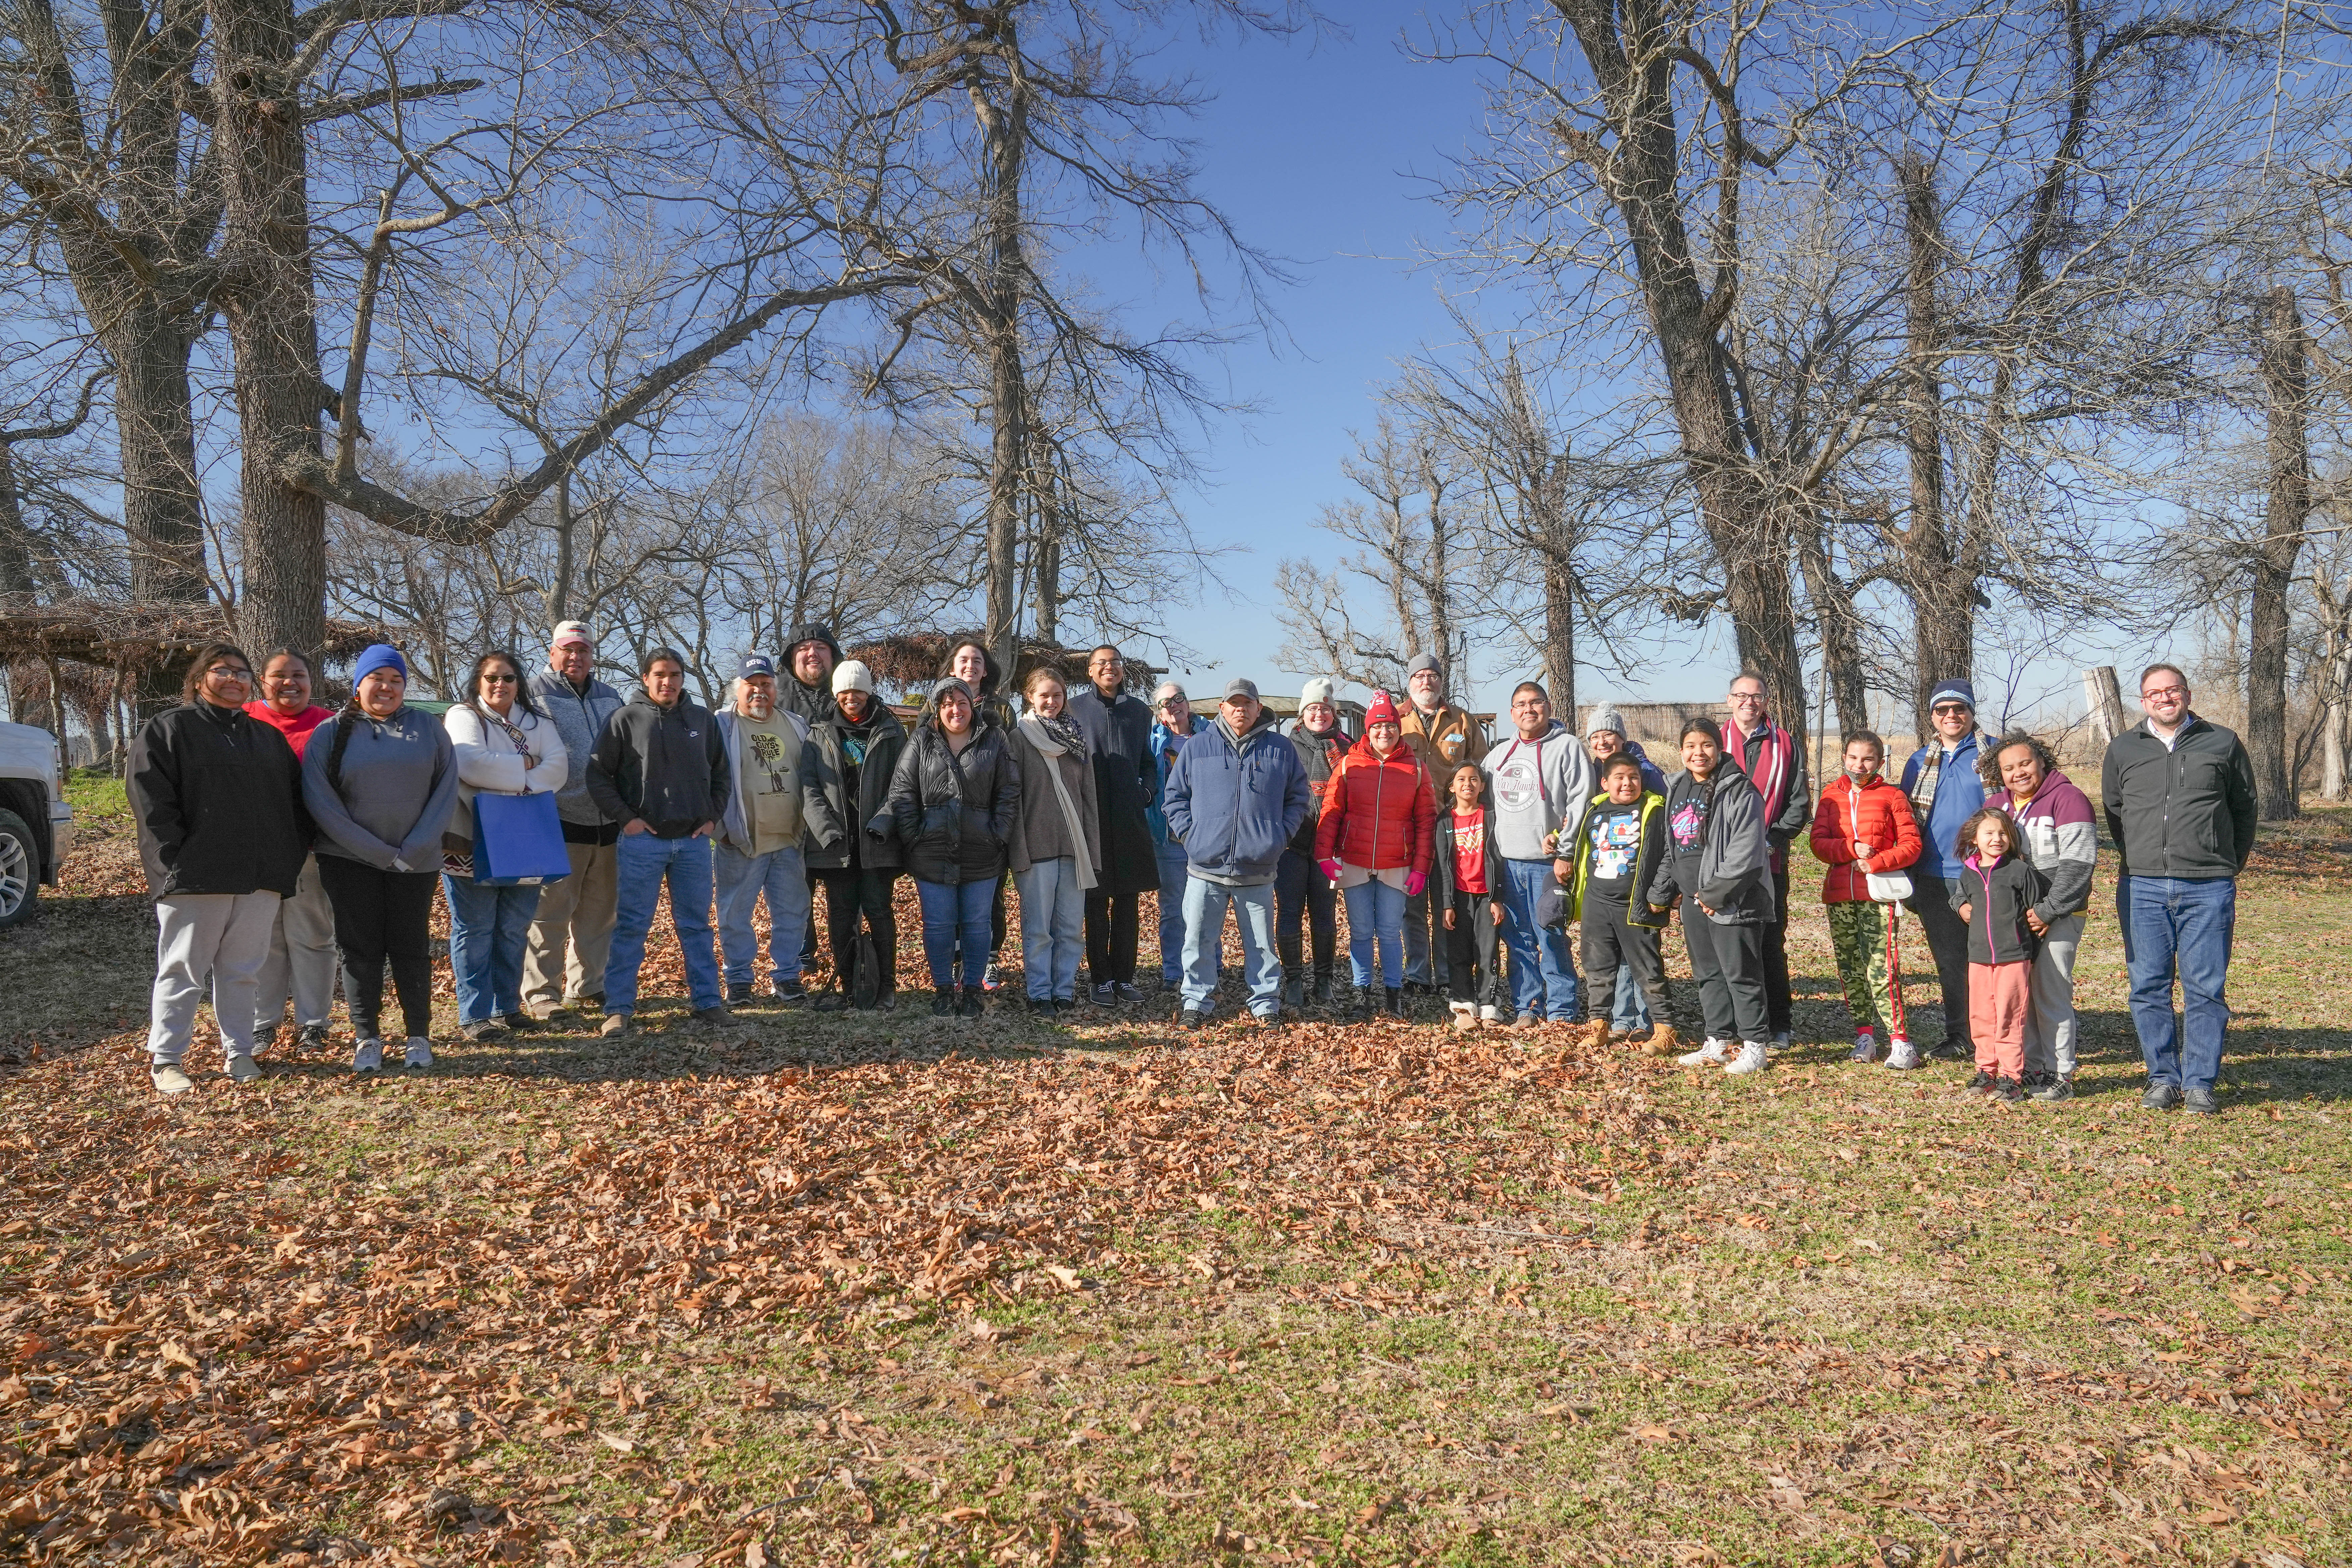 In March 2022, Mekko Chebon Kernell and his family welcome the Emory Indigenous Language Path Working Group for a visit, conversation, and lunch at the Helvpe Ceremonial Grounds in Hanna, OK.